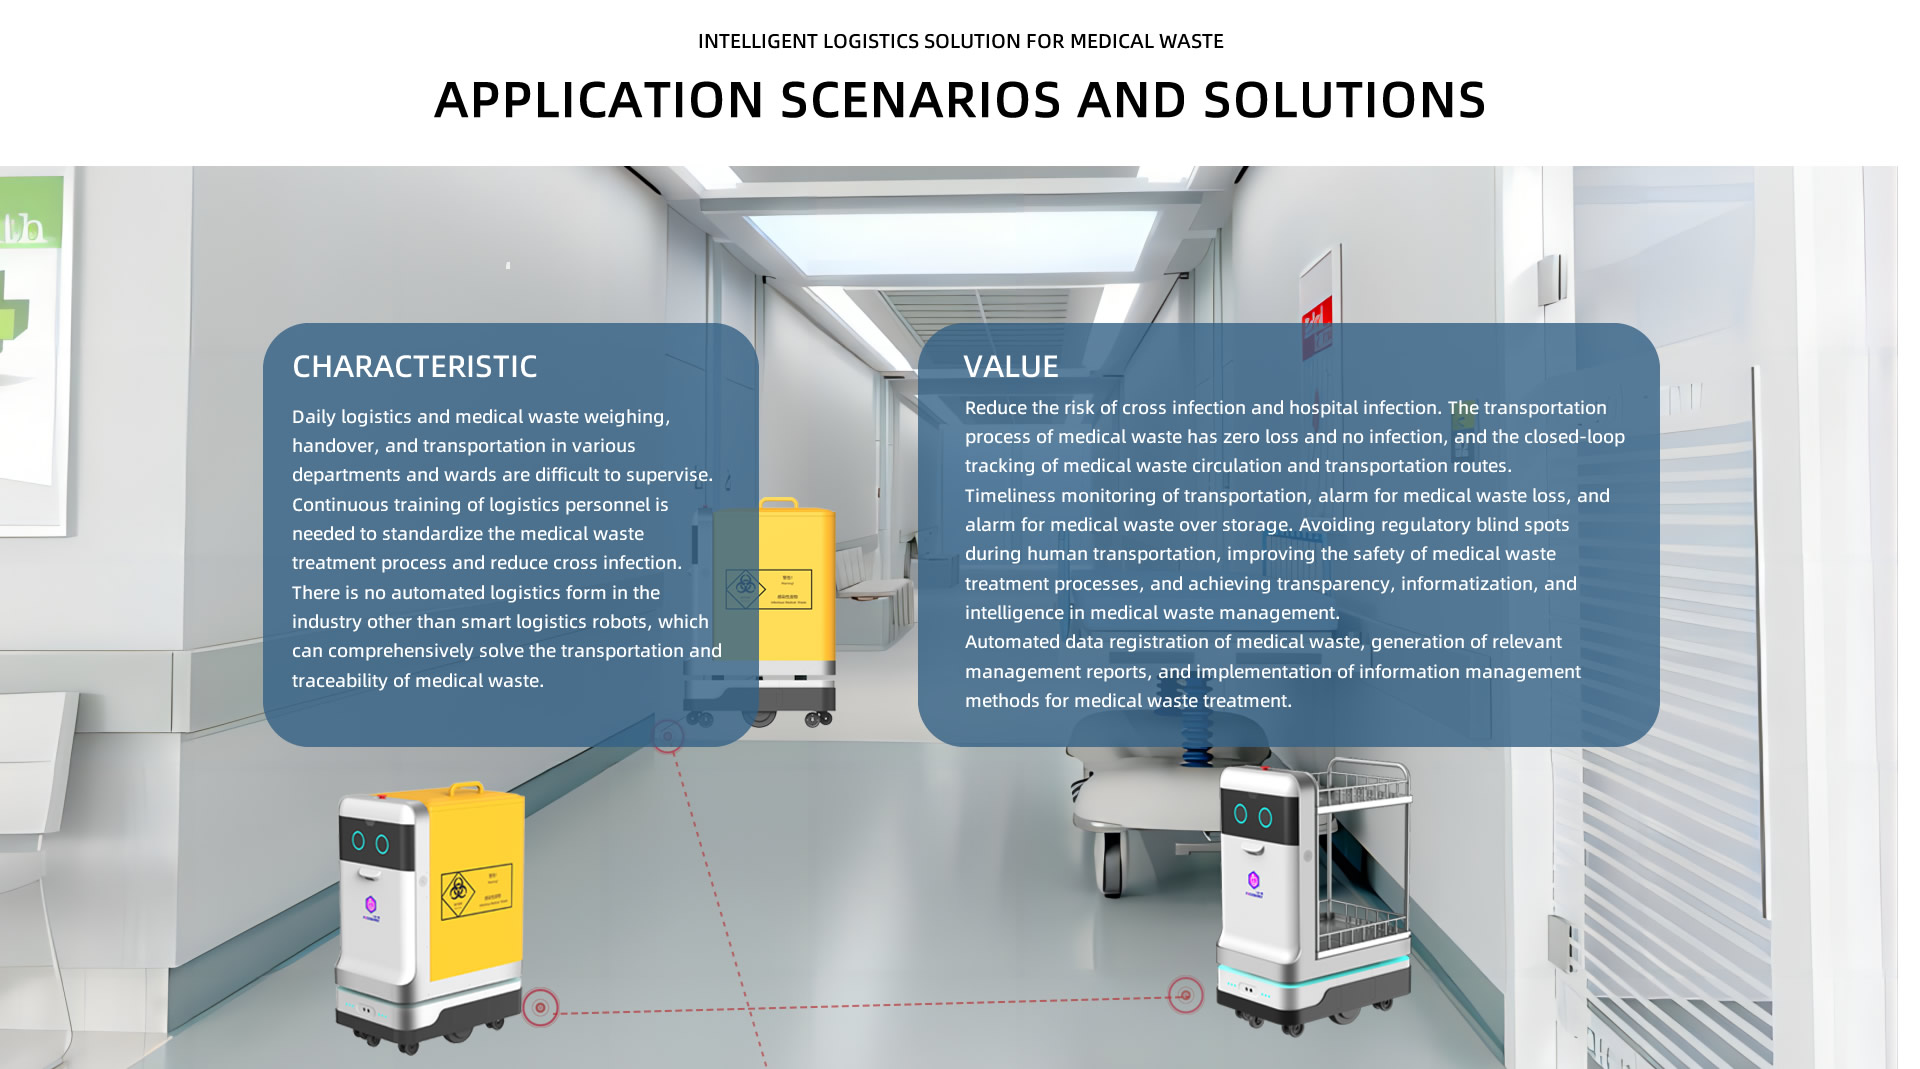 Intelligent logistics solution for medical waste Application scenarios and solutions. CHARACTERISTIC: Daily logistics and medical waste weighing, handover, and transportation in various departments and wards are difficult to supervise. Continuous training of logistics personnel is needed to standardize the medical waste treatment process and reduce cross infection. There is no automated logistics form in the industry other than smart logistics robots, which can comprehensively solve the transportation and traceability of medical waste; VALUE: Reduce the risk of cross infection and hospital infection. The transportation process of medical waste has zero loss and no infection, and the closed-loop tracking of medical waste circulation and transportation routes.
Timeliness monitoring of transportation, alarm for medical waste loss, and alarm for medical waste over storage. Avoiding regulatory blind spots during human transportation, improving the safety of medical waste treatment processes, and achieving transparency, informatization, and intelligence in medical waste management.
Automated data registration of medical waste, generation of relevant management reports, and implementation of information management methods for medical waste treatment.